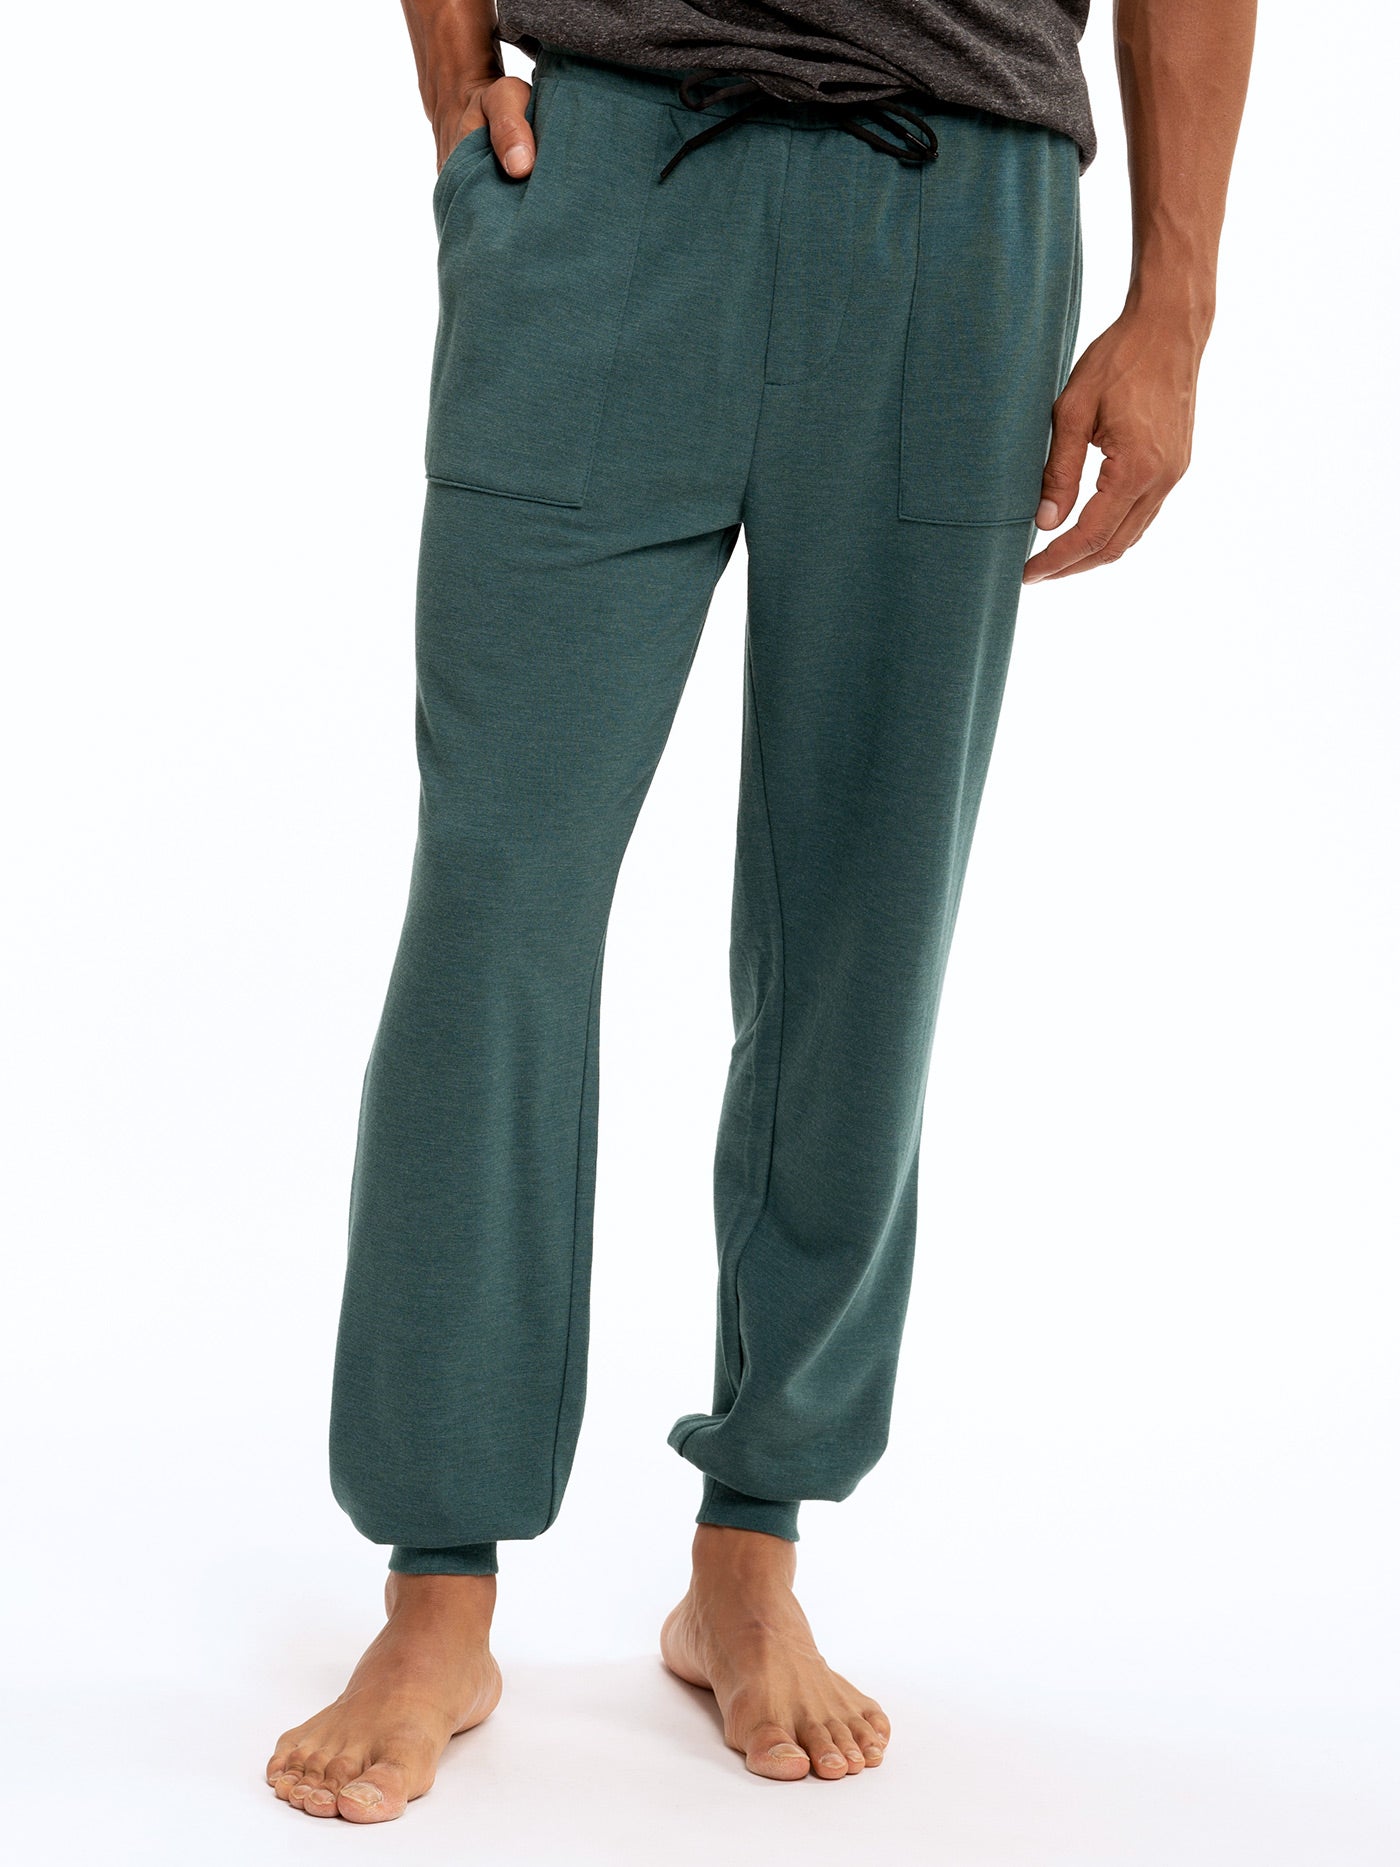 Men's Pants – Threads 4 Thought